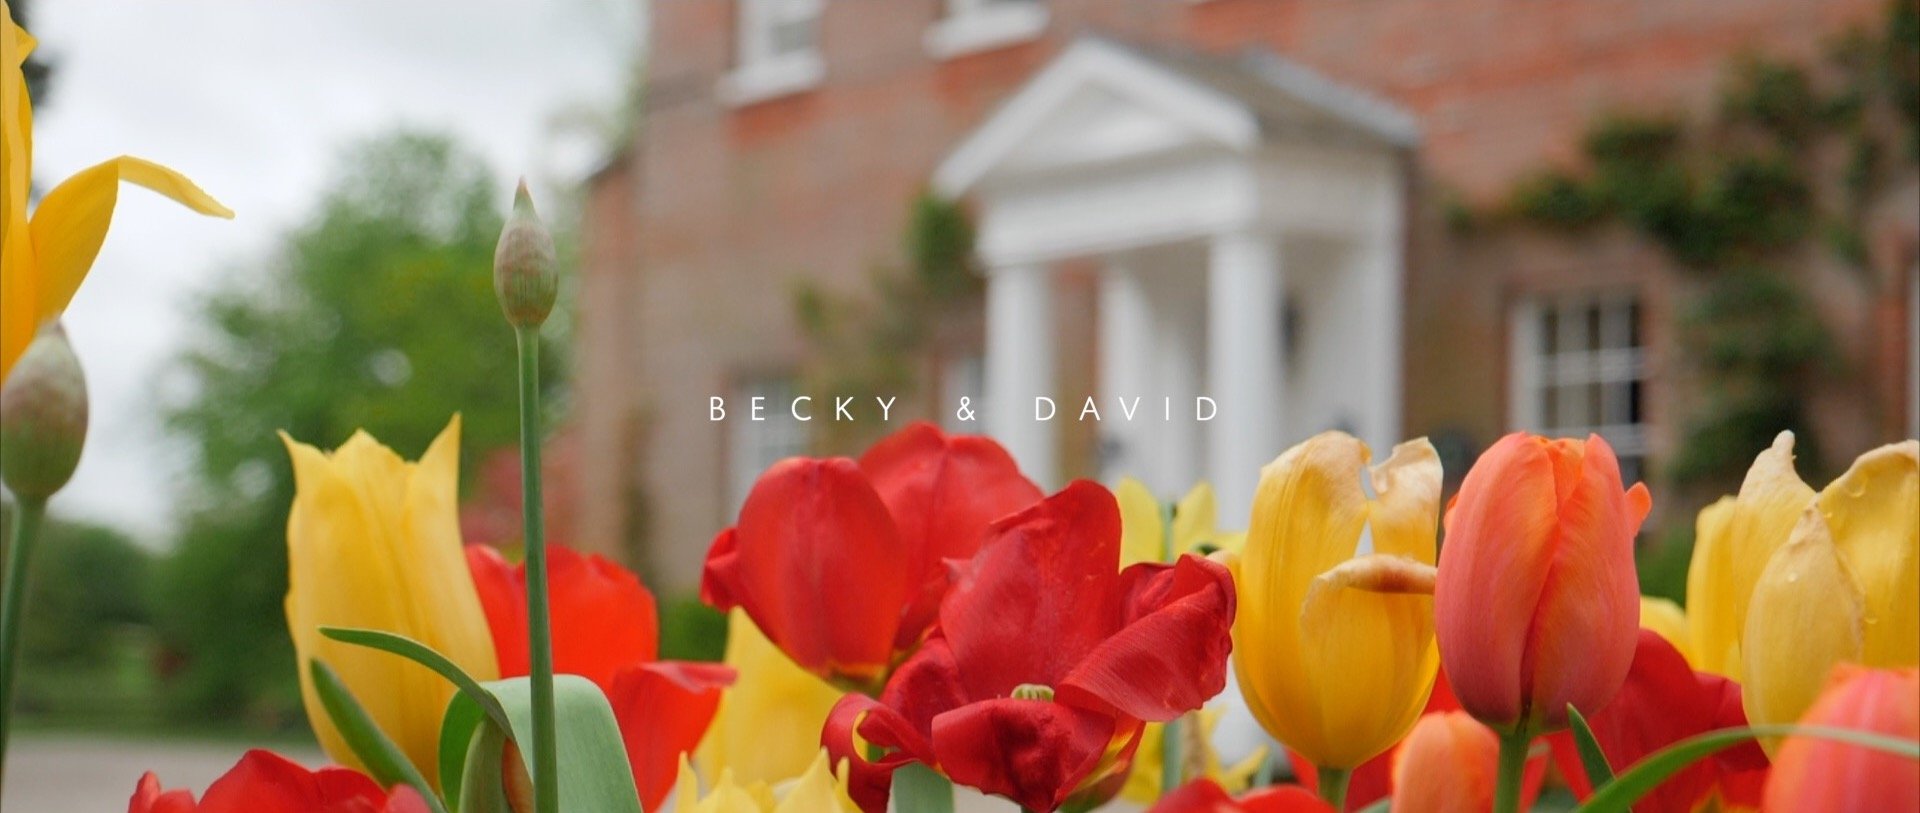 David and Becky wedding video filmed at Mulberry House.jpg